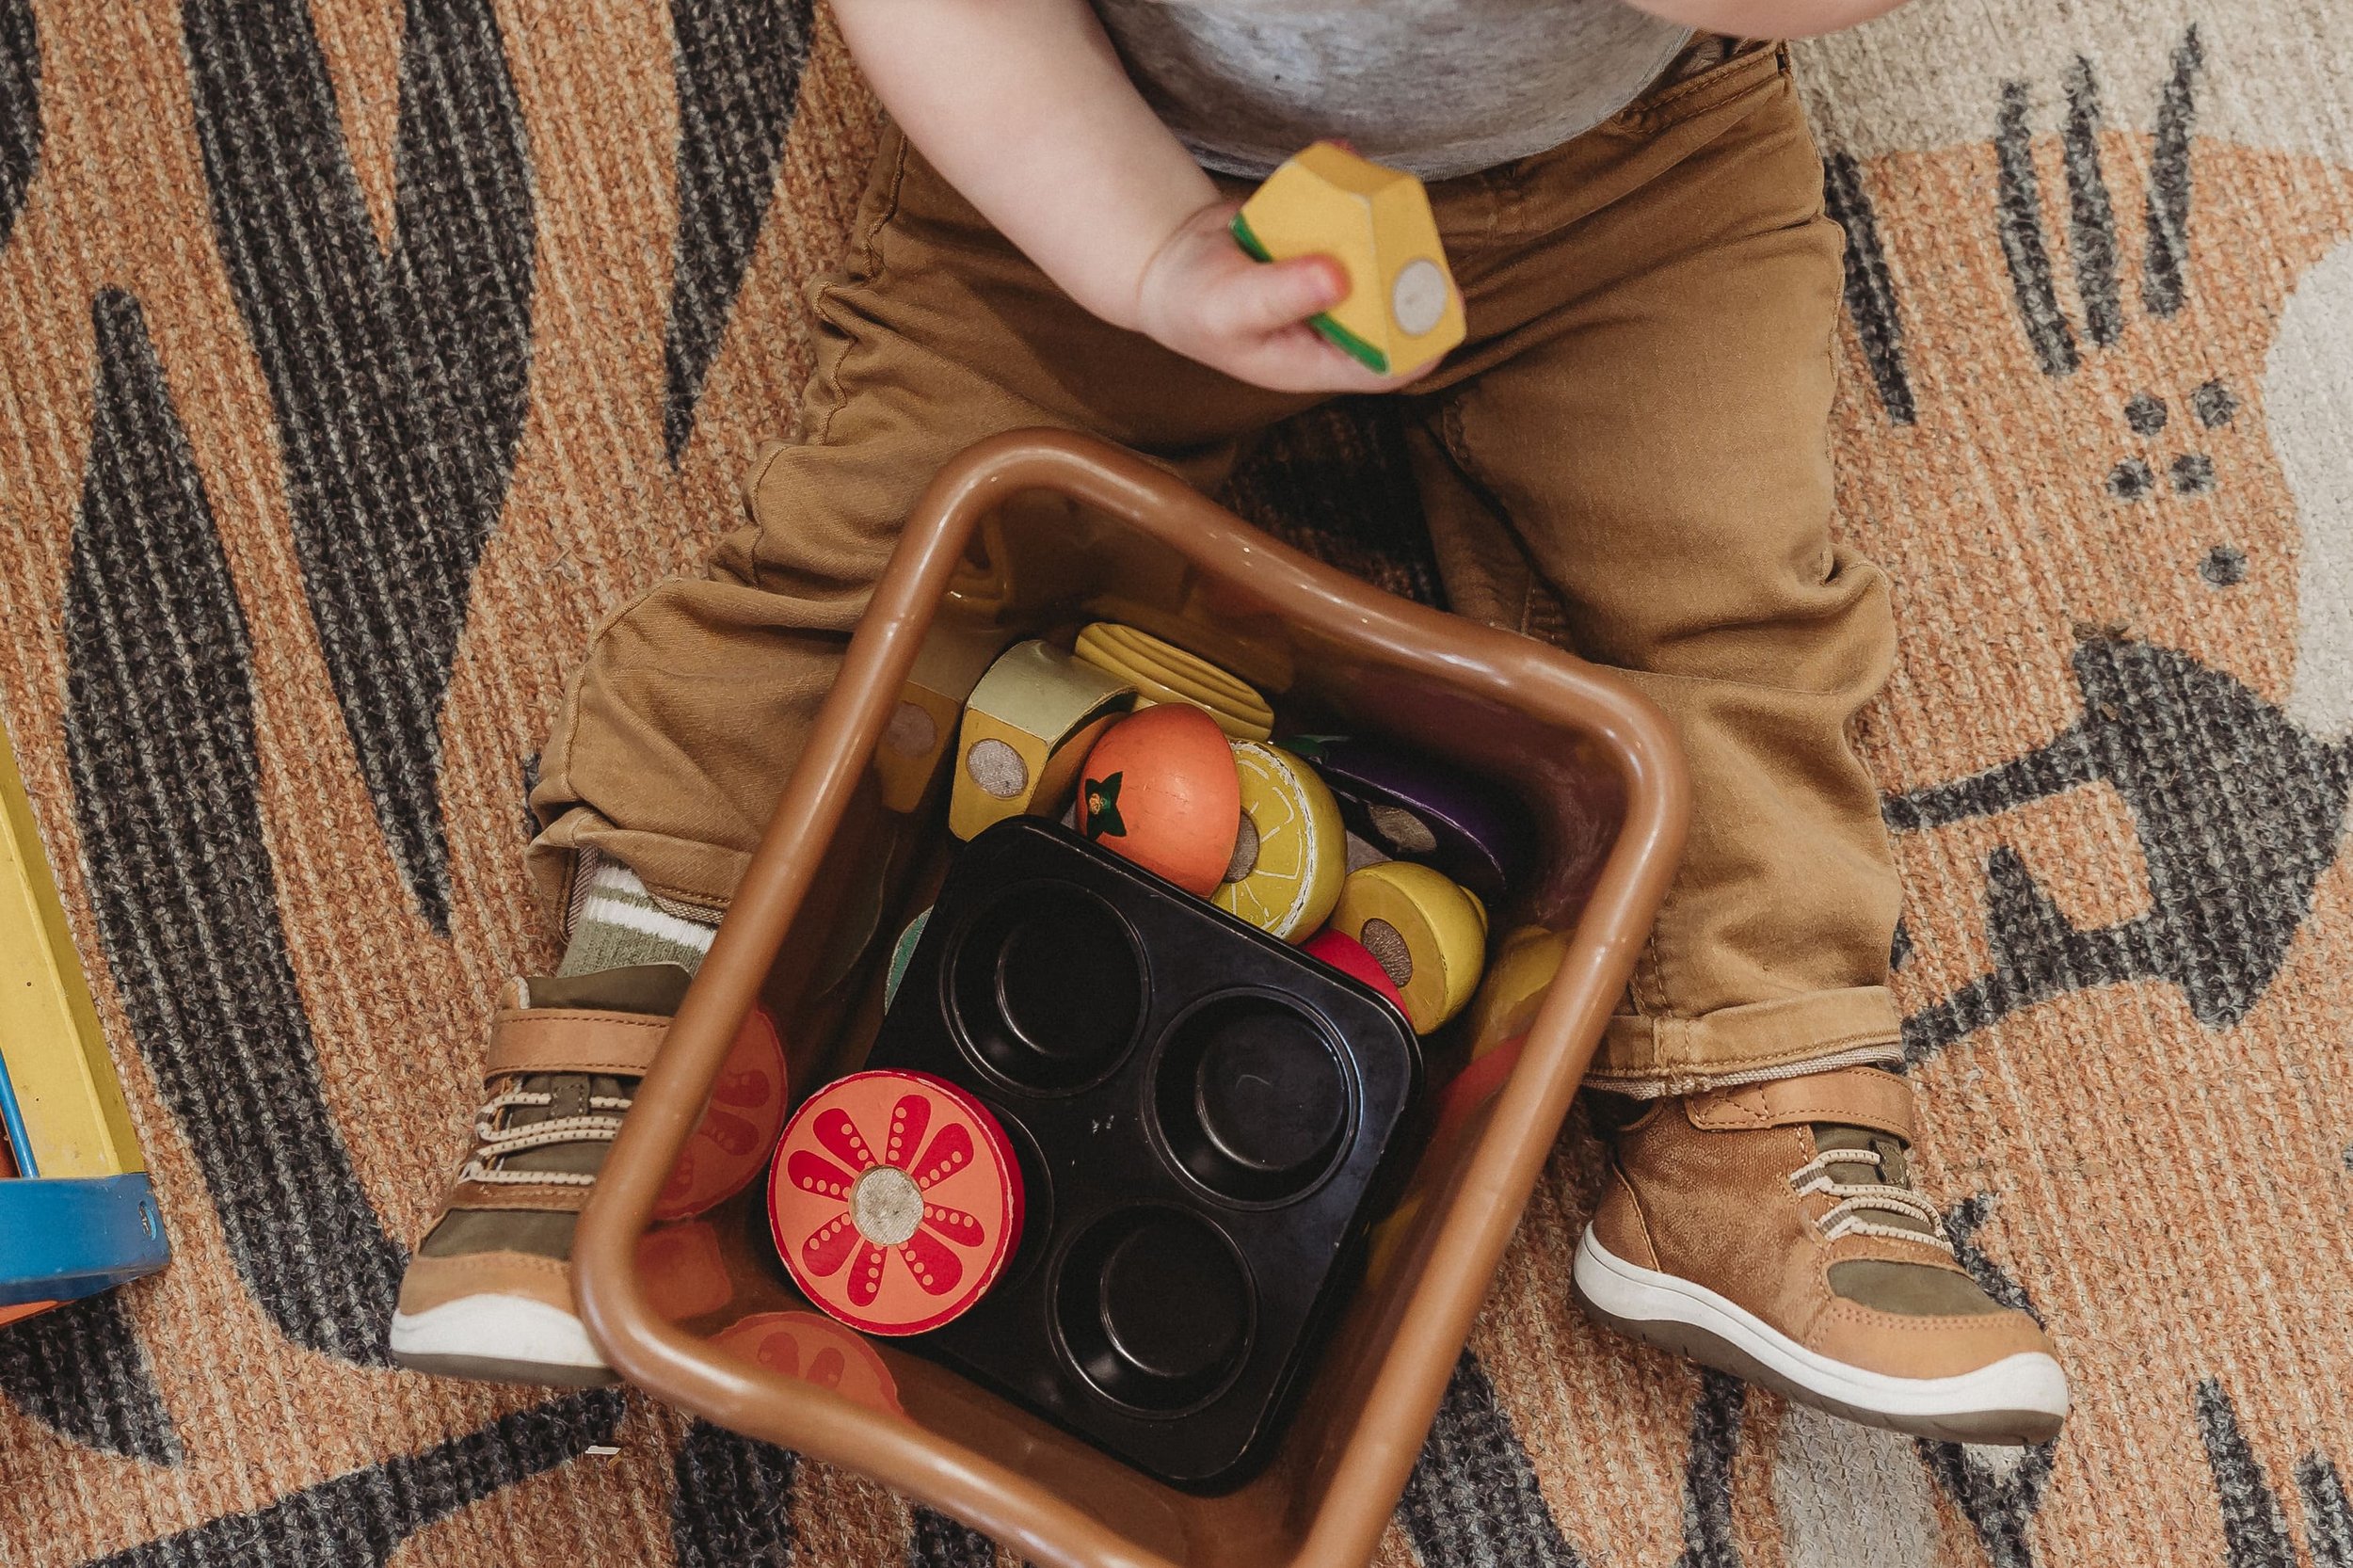  a central illinois photographer captured a toddler’s legs as he plays with a bin of toys 